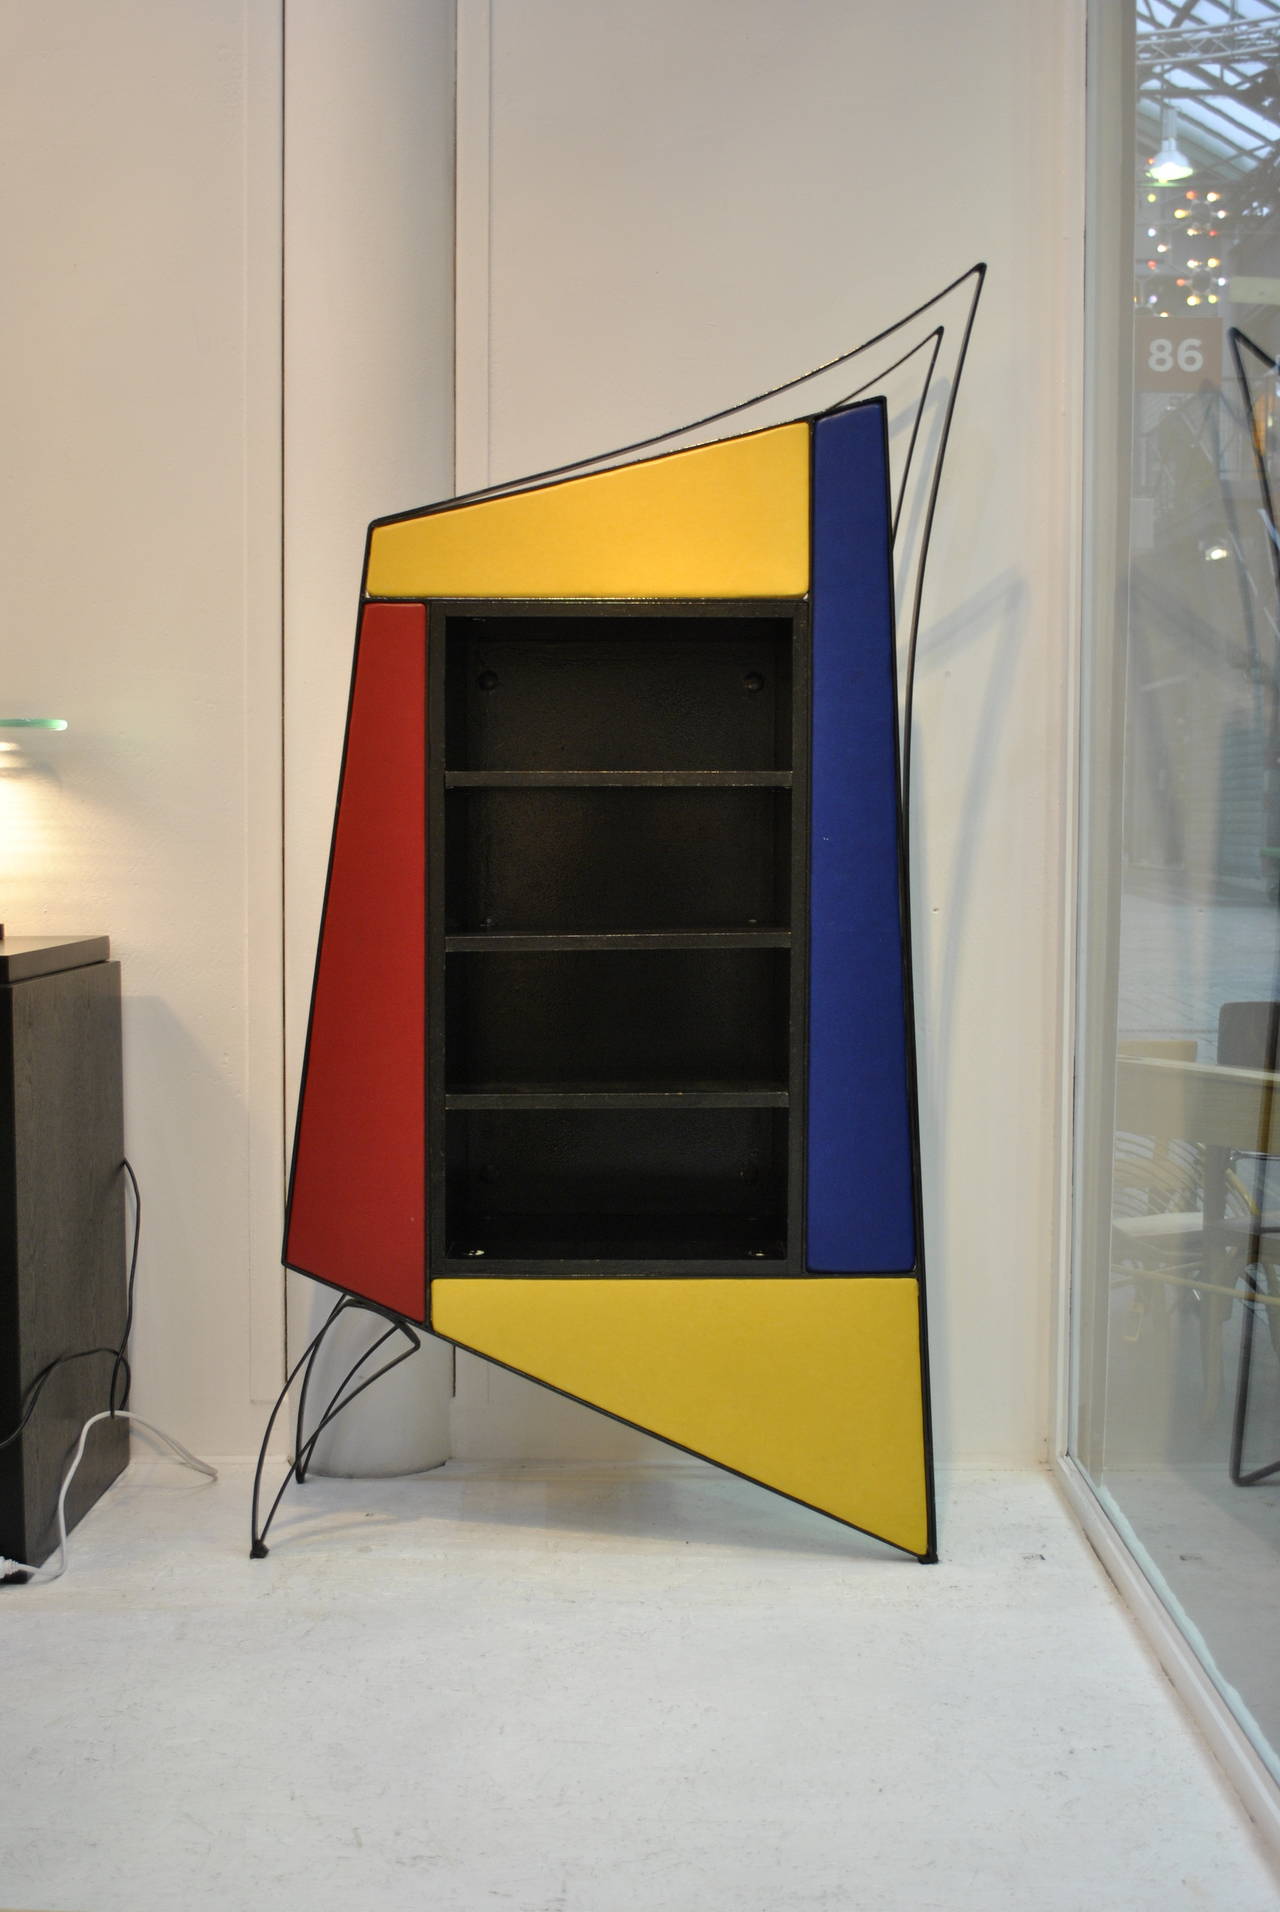 A unique display or bookcase cabinet by the French Designer Cyrille Varet. A very strong design with primary colors en combined both geometric and voluptuous lines.

The structure is in lacquered wrought iron, with a wooden case in it. The front